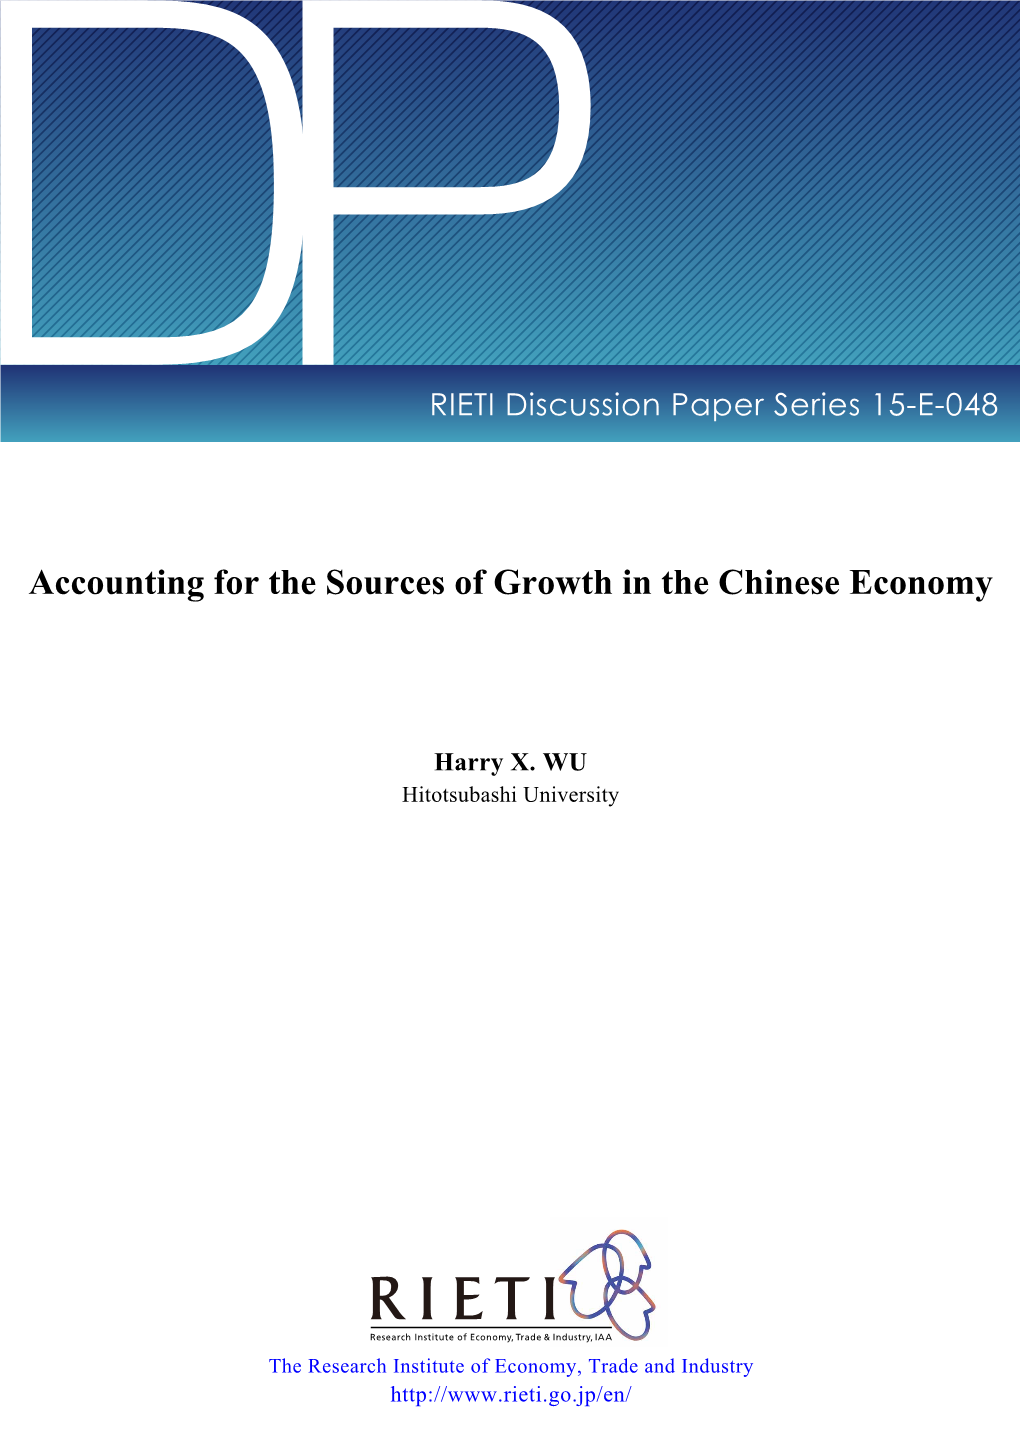 Accounting for the Sources of Growth in the Chinese Economy